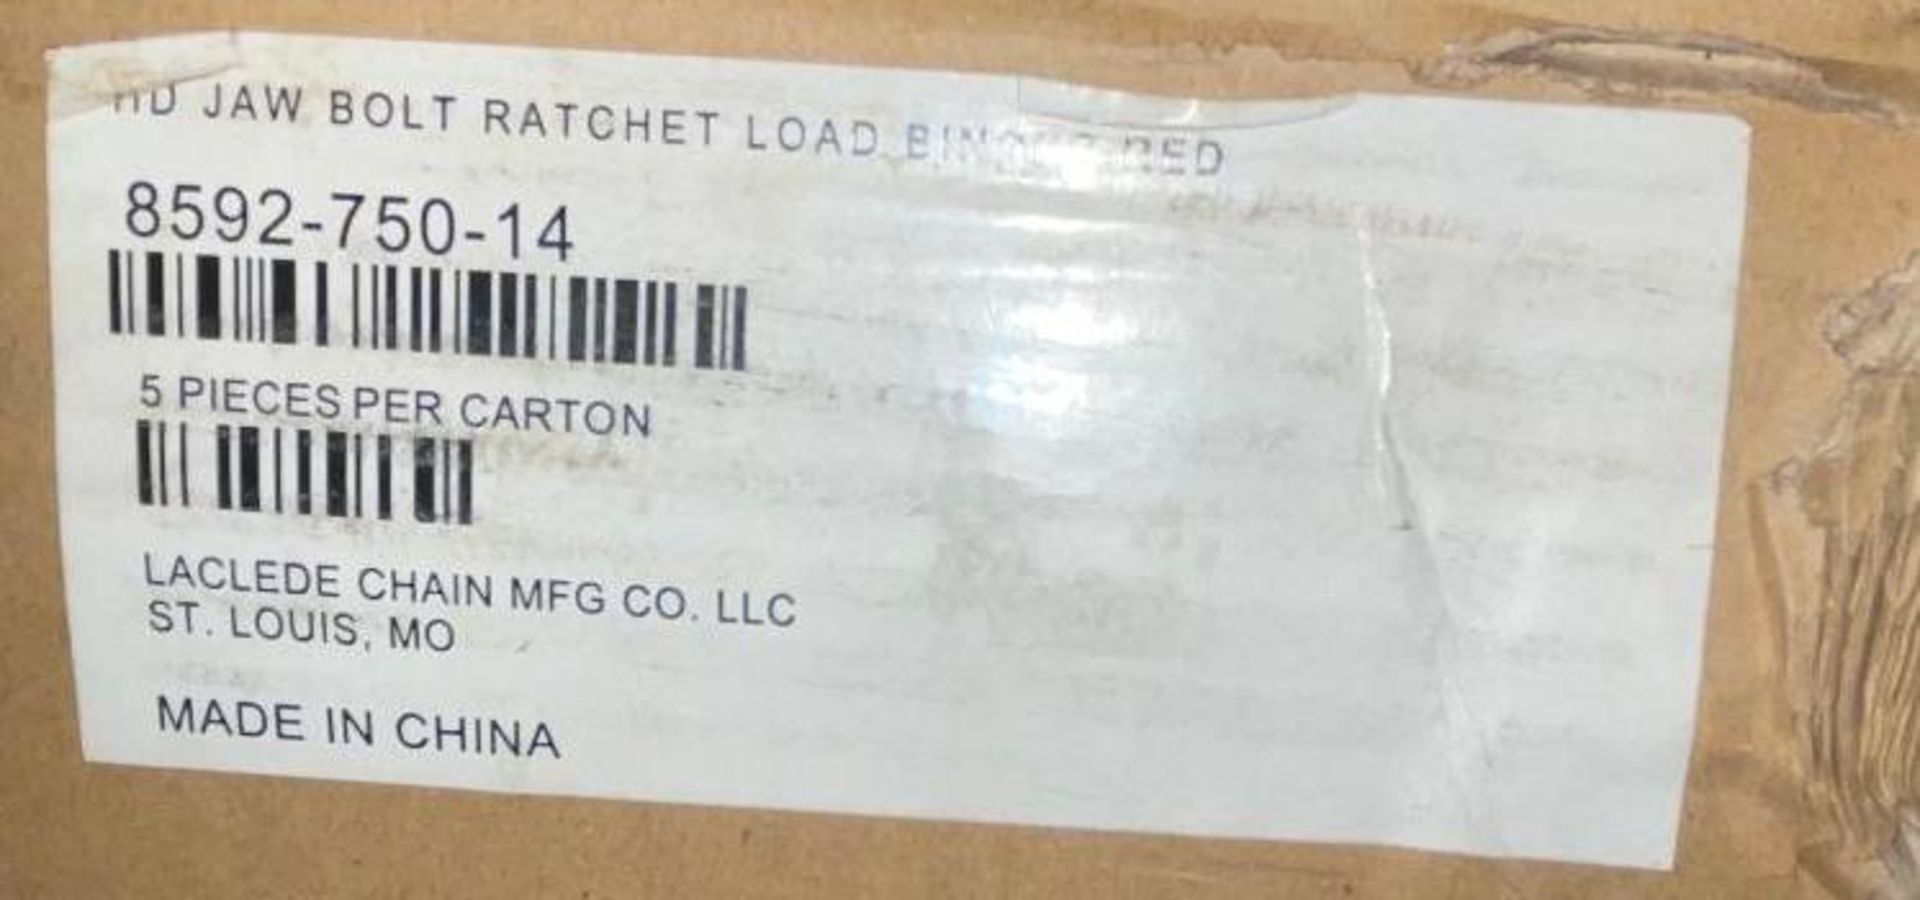 (5) HEAVY DUTY JAW BOLT RATCHET LOAD BINDER BRAND / MODEL: LACLEDE CHAIN MFG CO 8592-750-14 ADDITION - Image 2 of 3